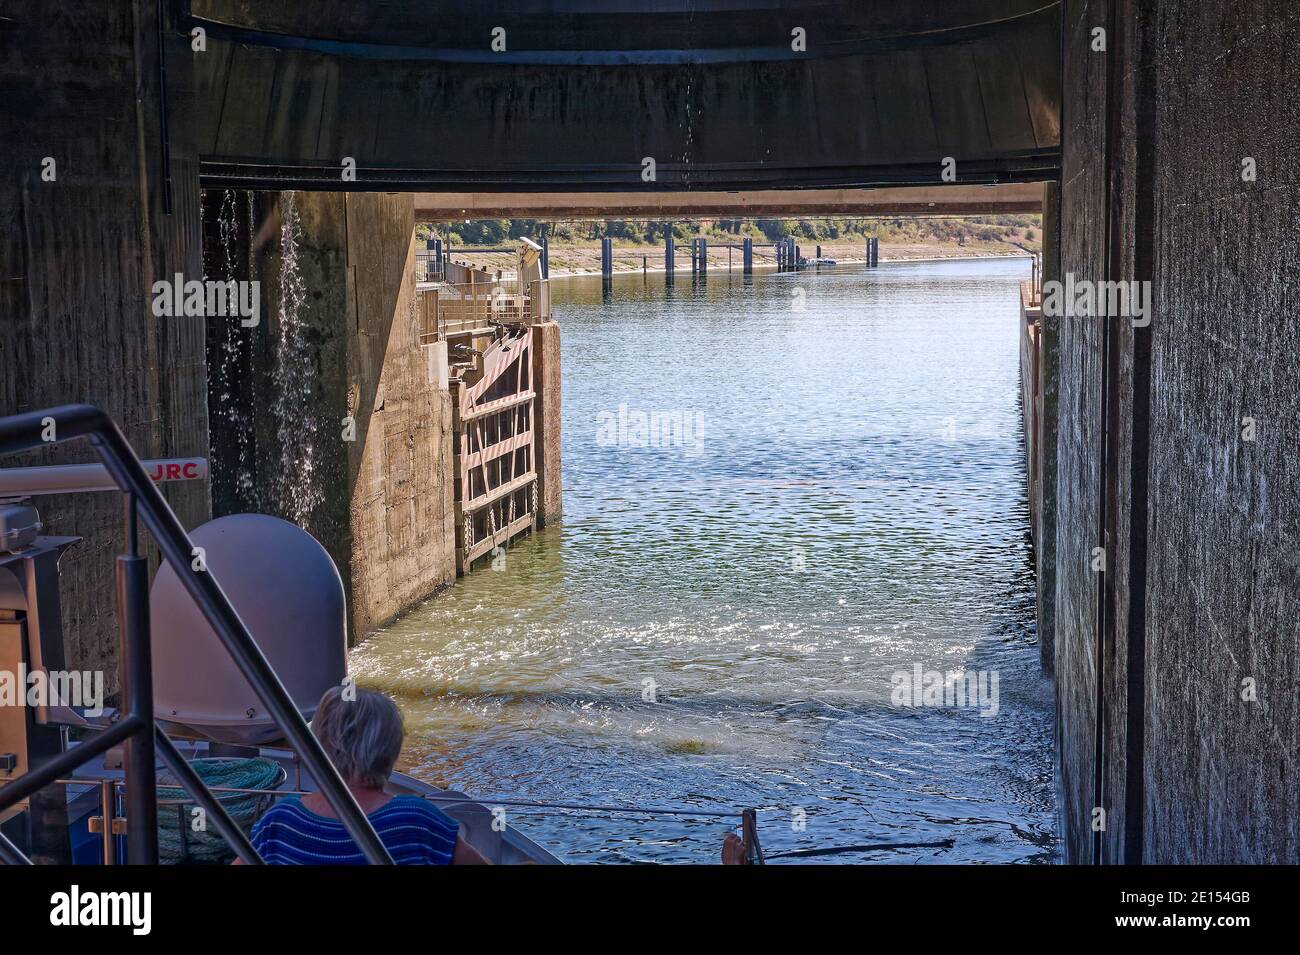 riverboat exiting Bollene Lock, Rhone River, gate up, 71 foot water level difference, engineering feat, travel, transport, narrow, bow, people, Proven Stock Photo